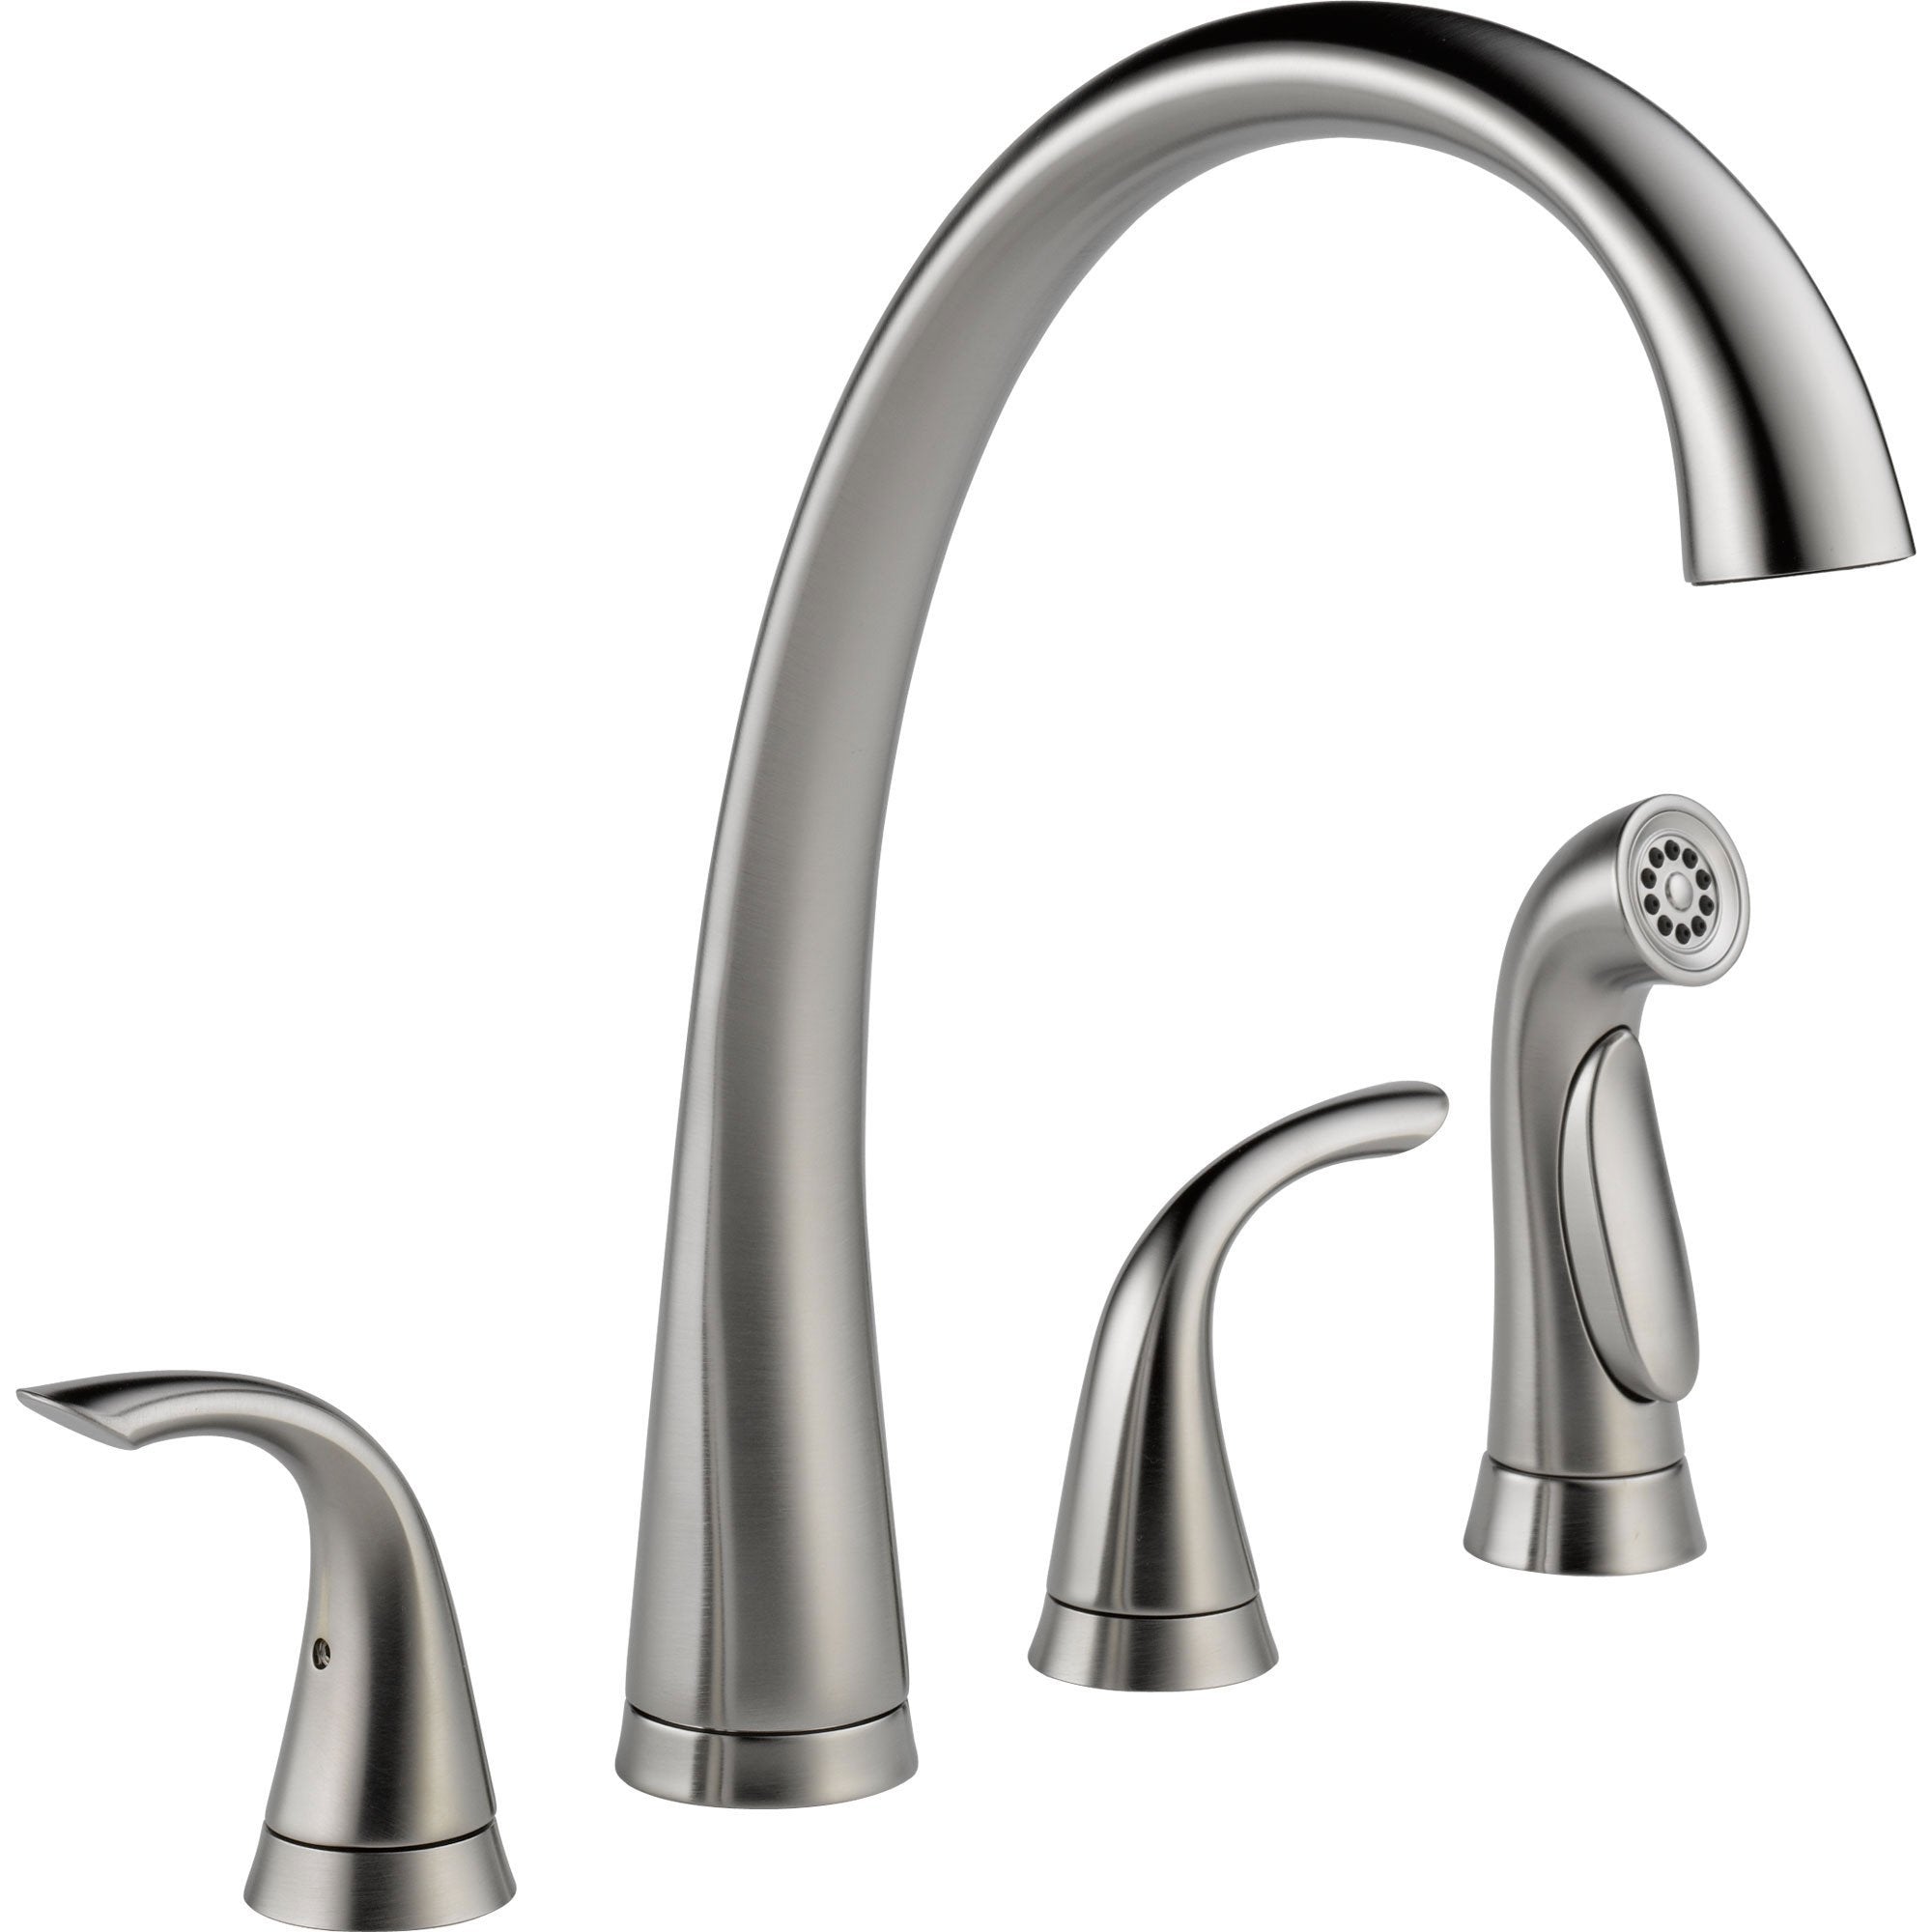 Delta Arctic Stainless High Arch Spout Widespread Kitchen Faucet w/ Spray 555816